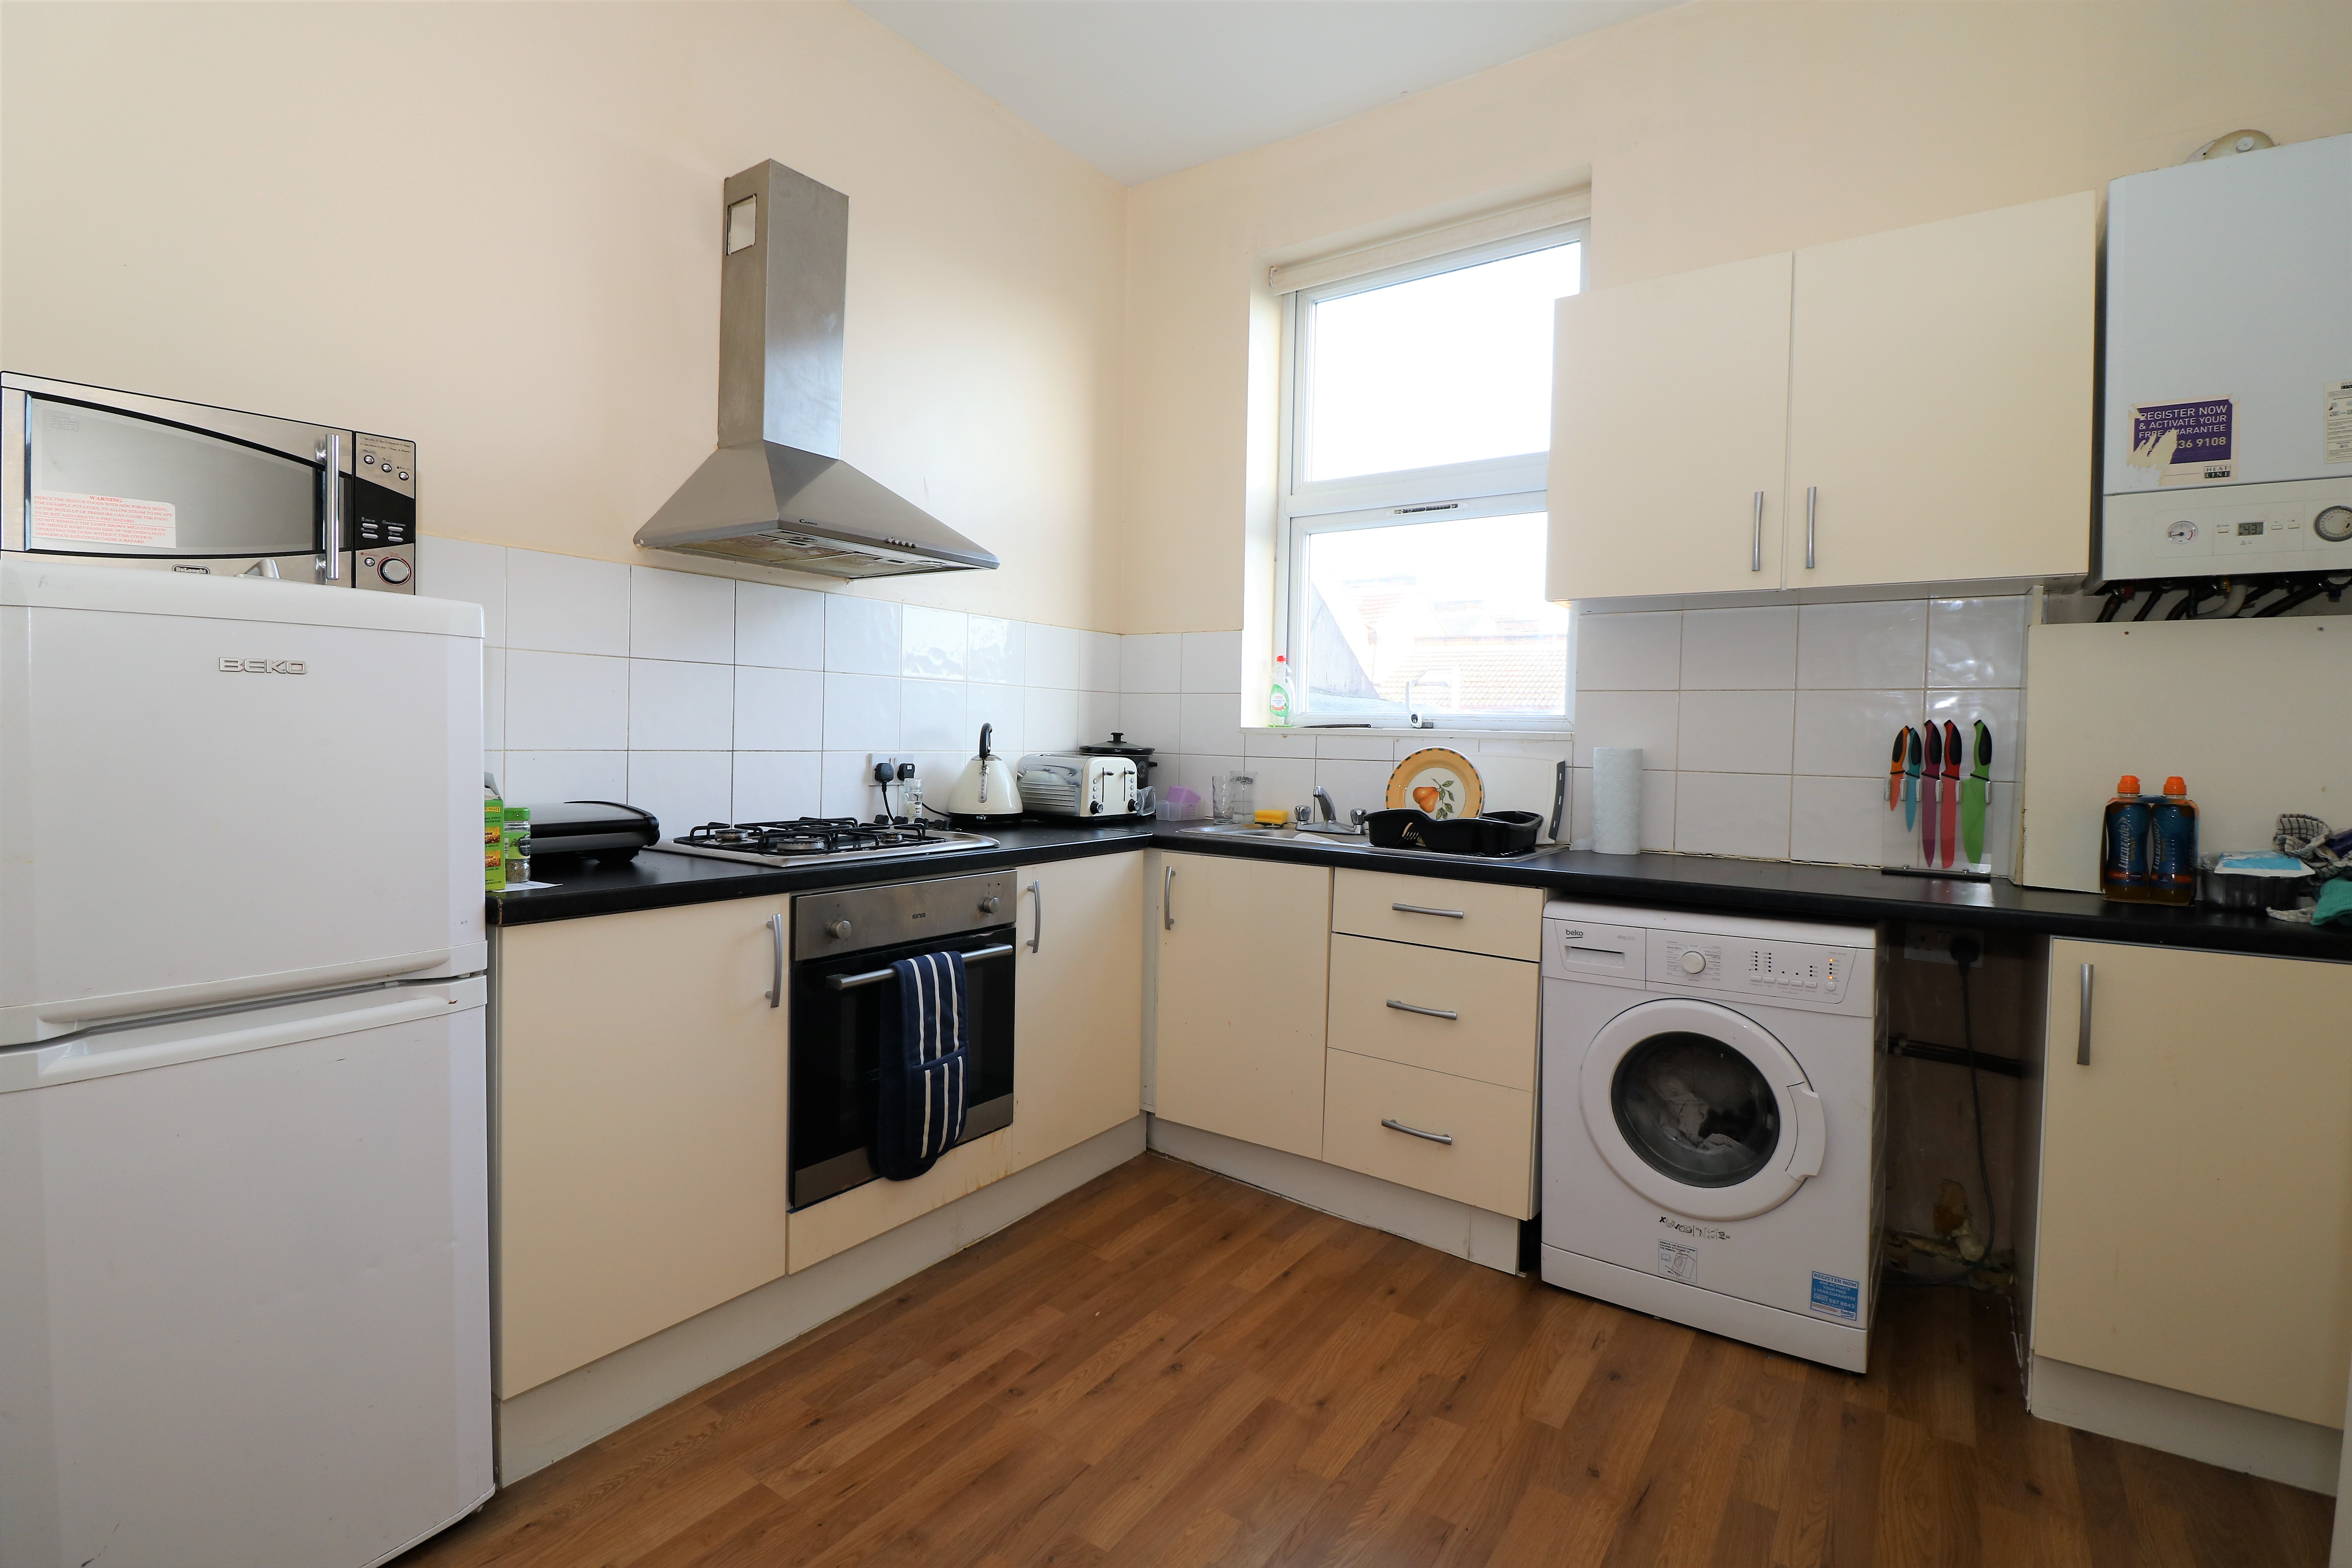 First floor two double bedroom flat near Holloway and Archway, N19